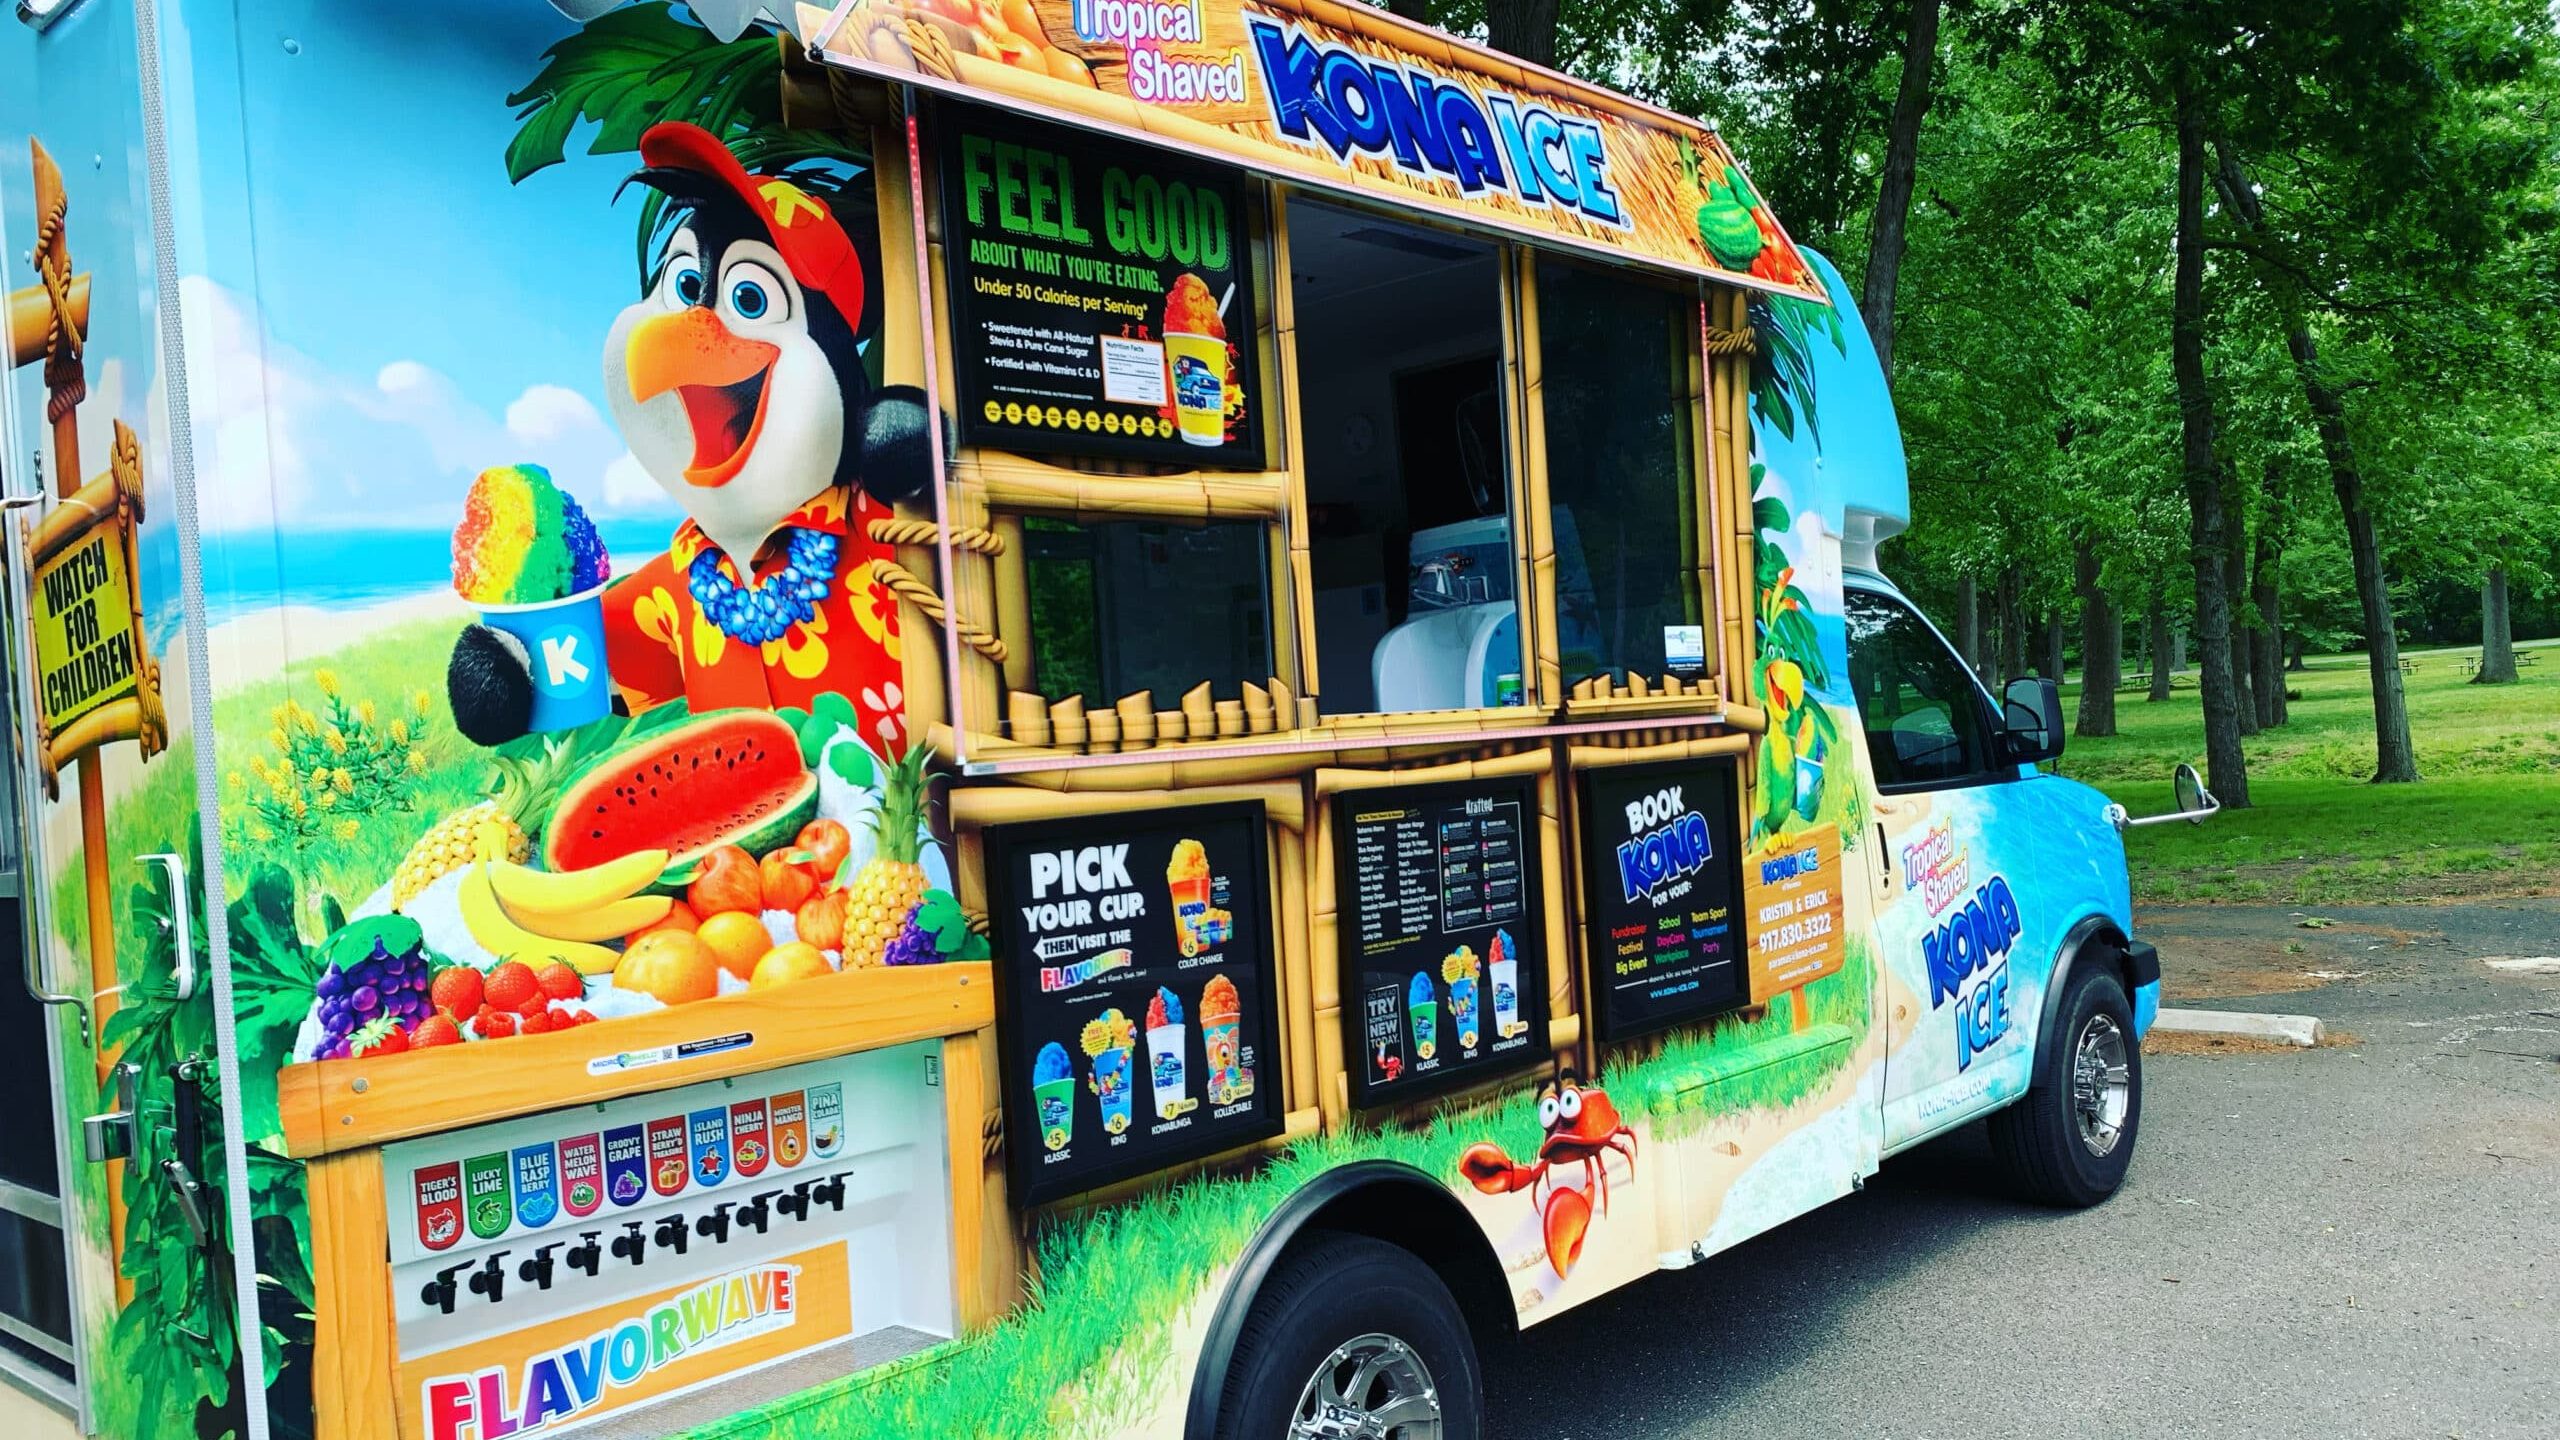 Kona Ice Franchise Cost Worth It In 2022?